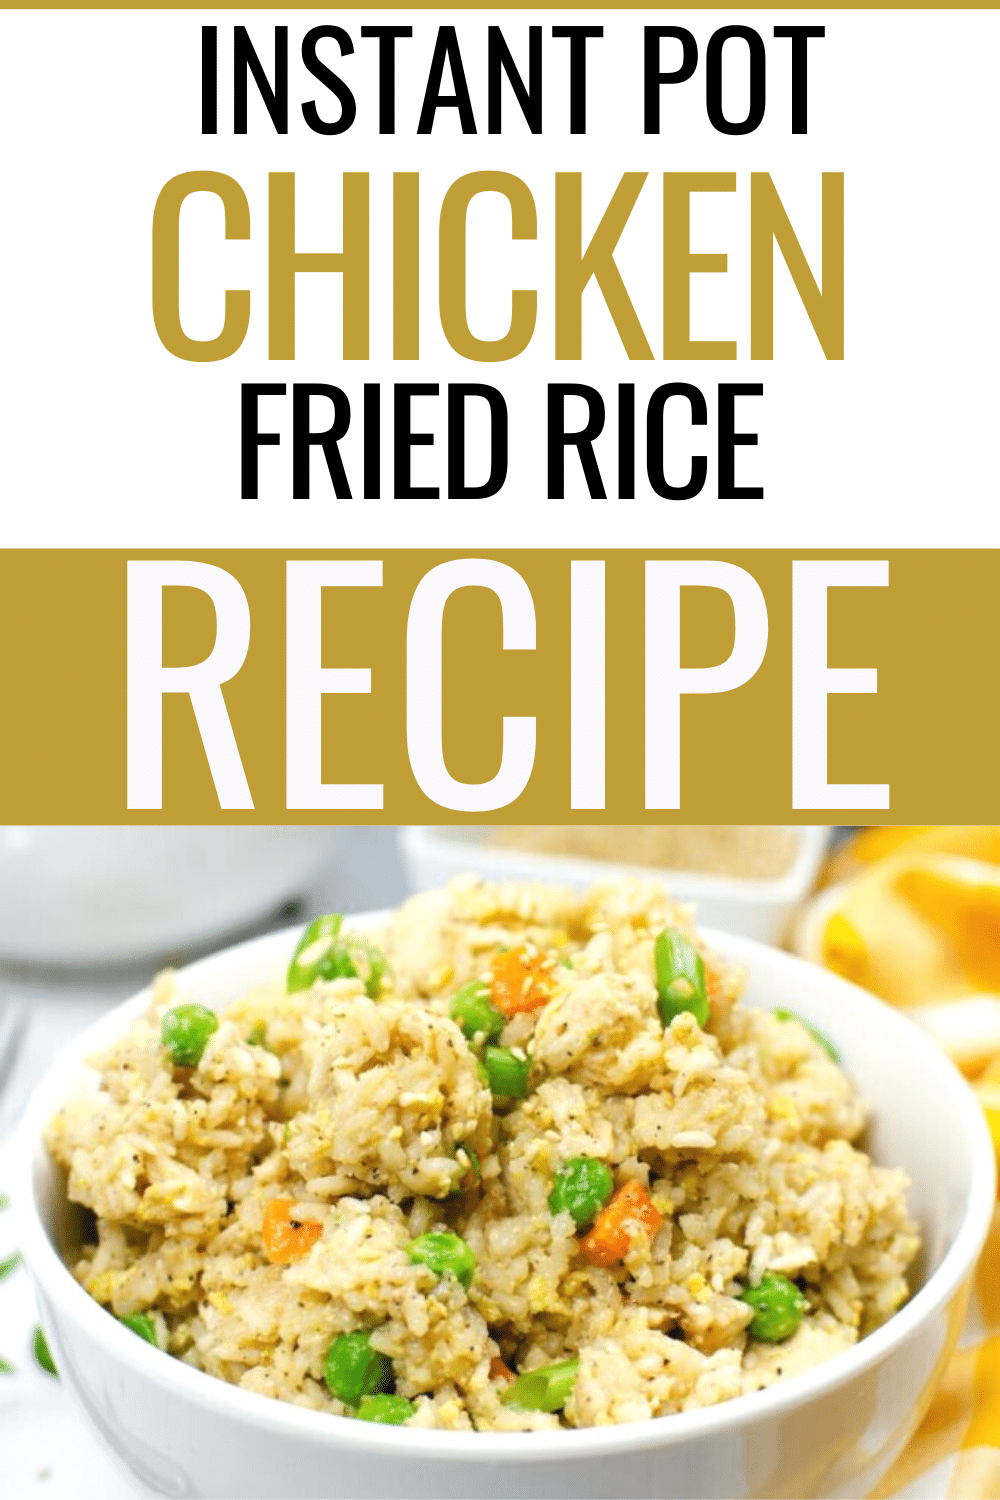 This instant pot chicken fried rice is a quick and easy all-in-one meal for lunch or dinner. Ready in no time, it tastes as good as takeout chicken fried rice! #instantpot #pressurecooker #chickenfriedrice #asianfood via @wondermomwannab